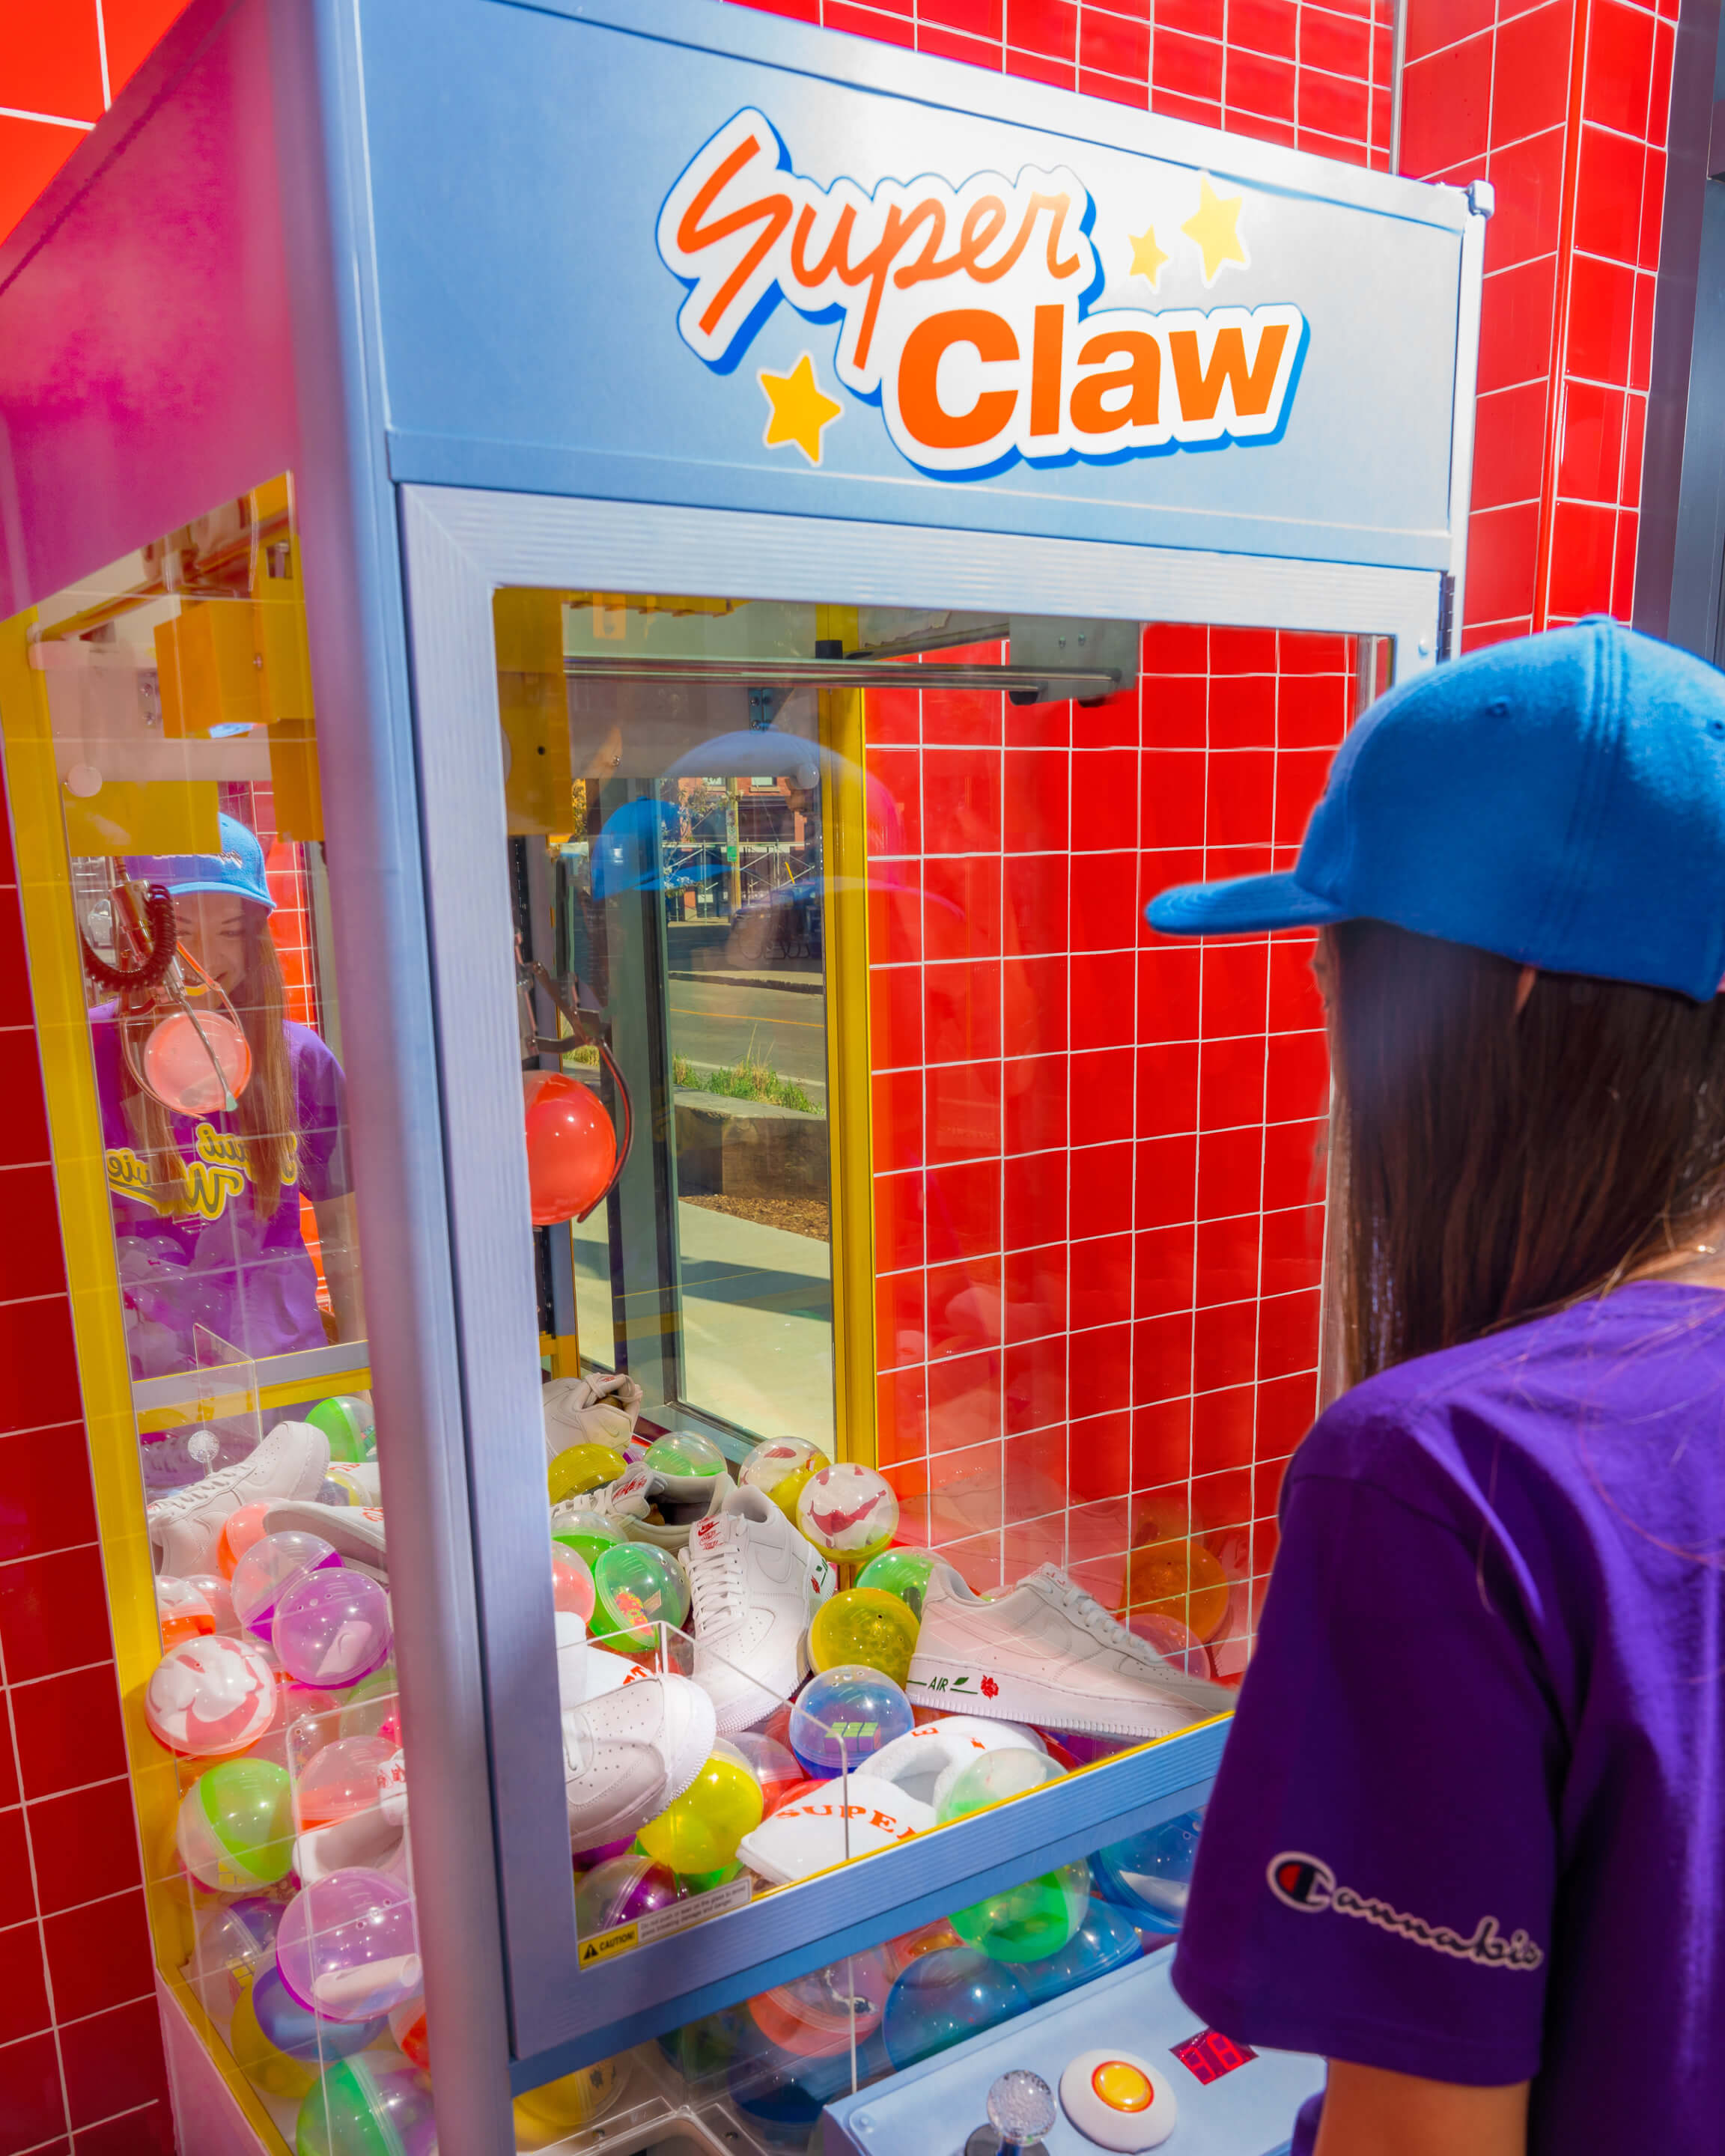 a person playing a claw machine game inside of a Superette